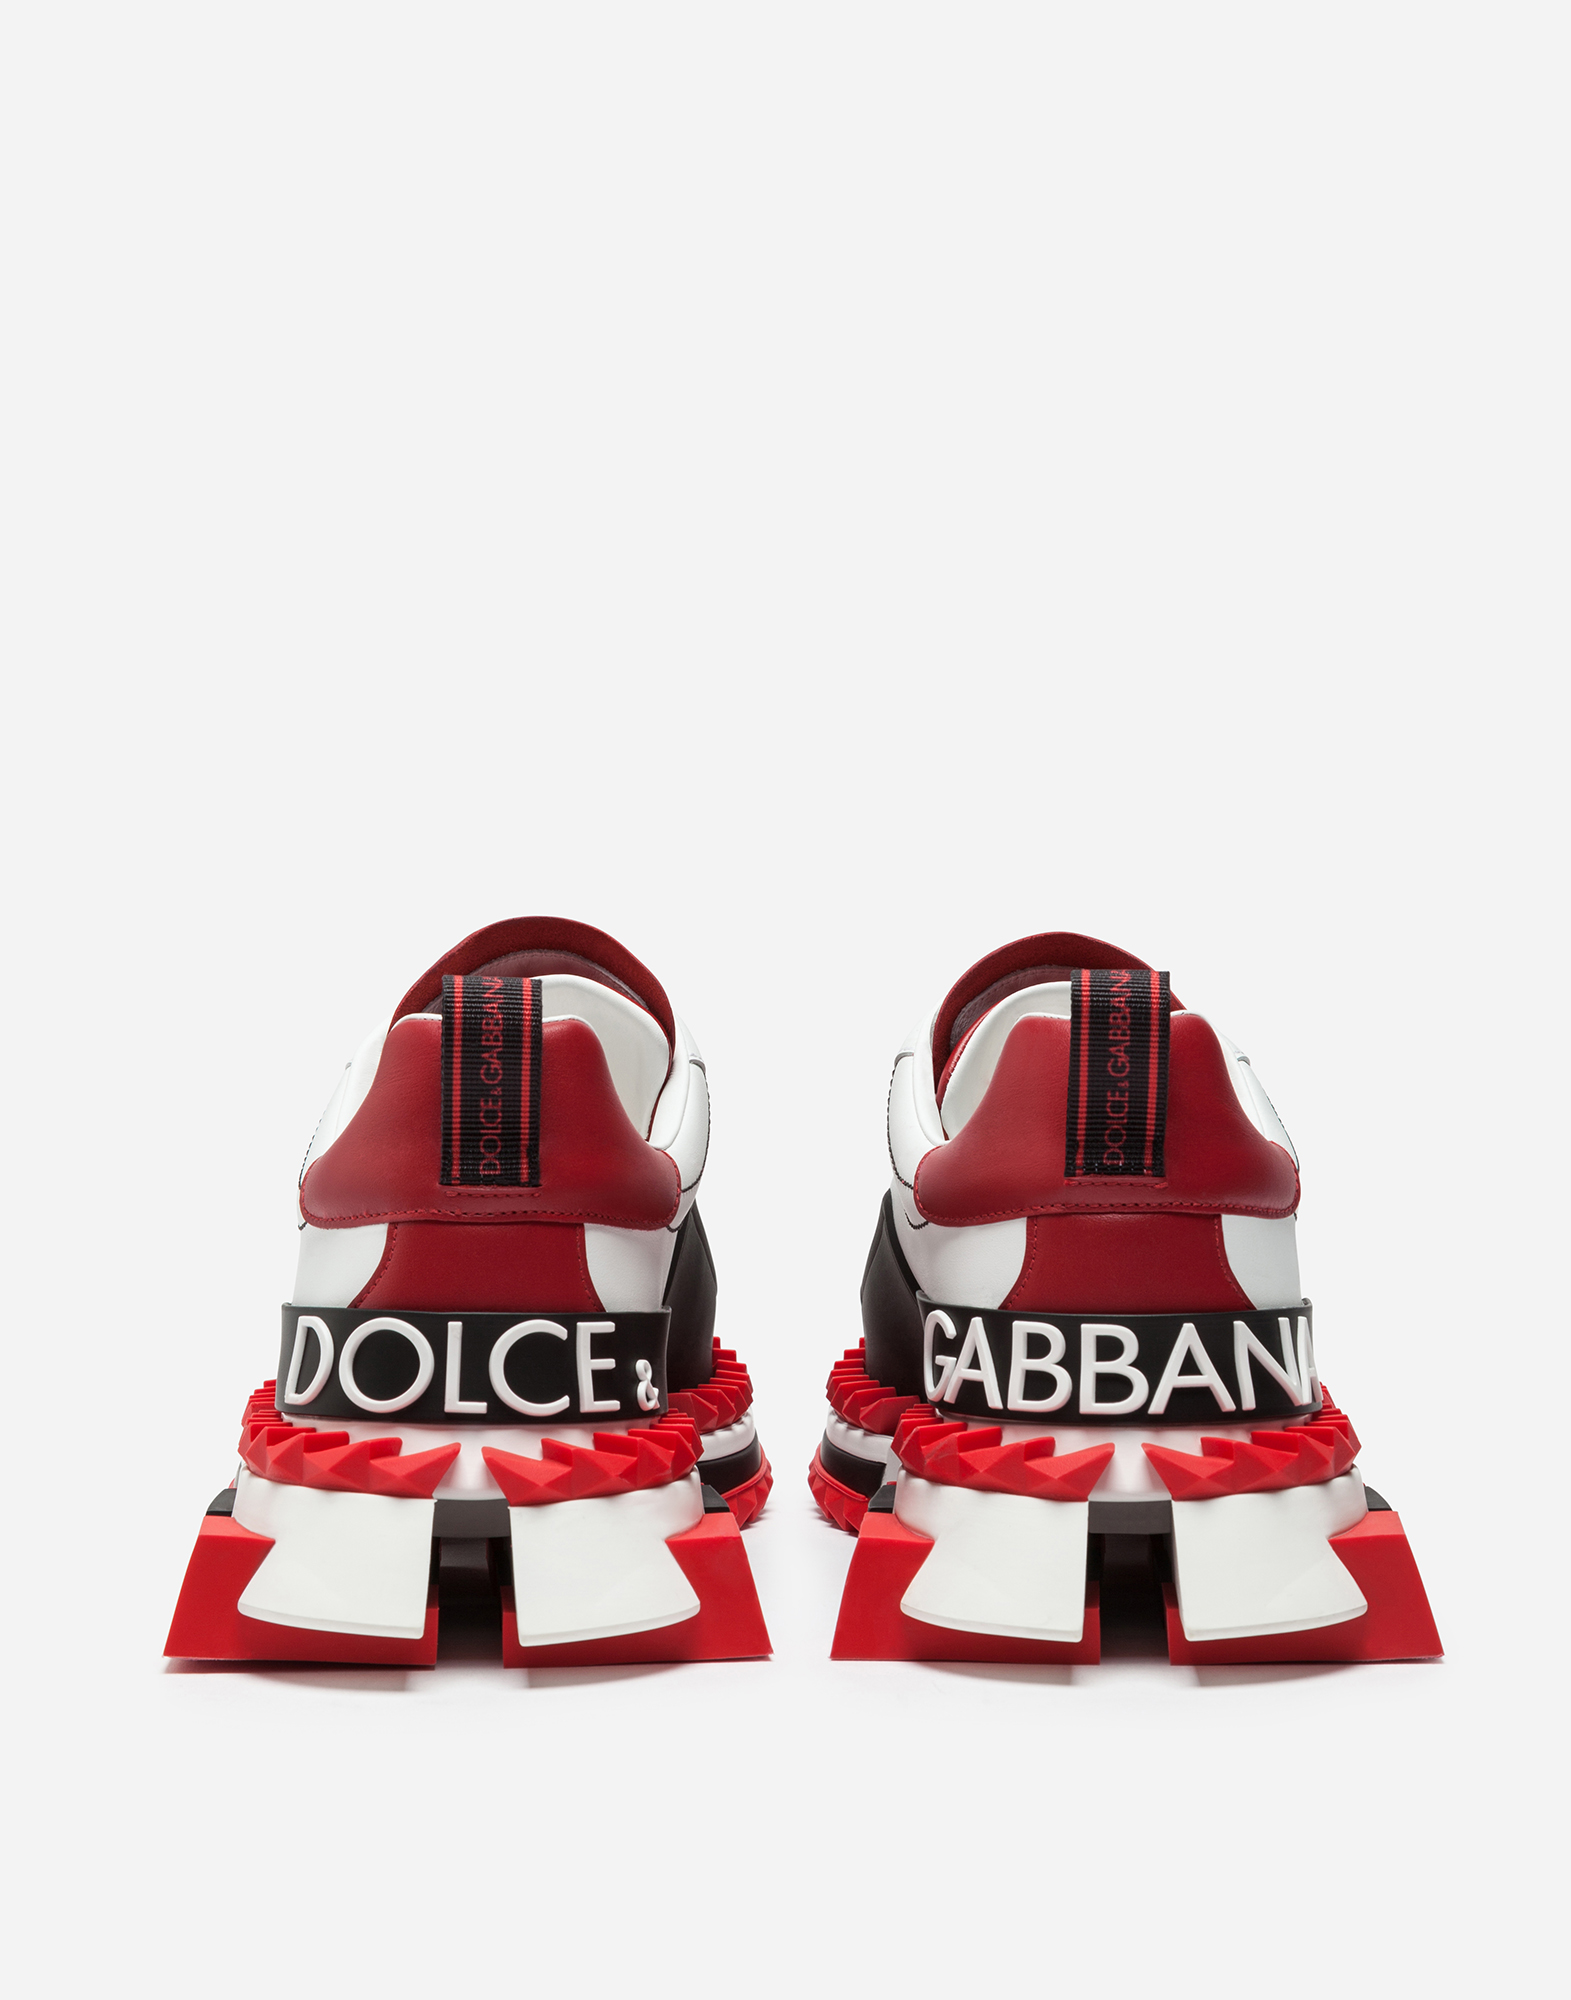 dolce gabbana shoes red and white